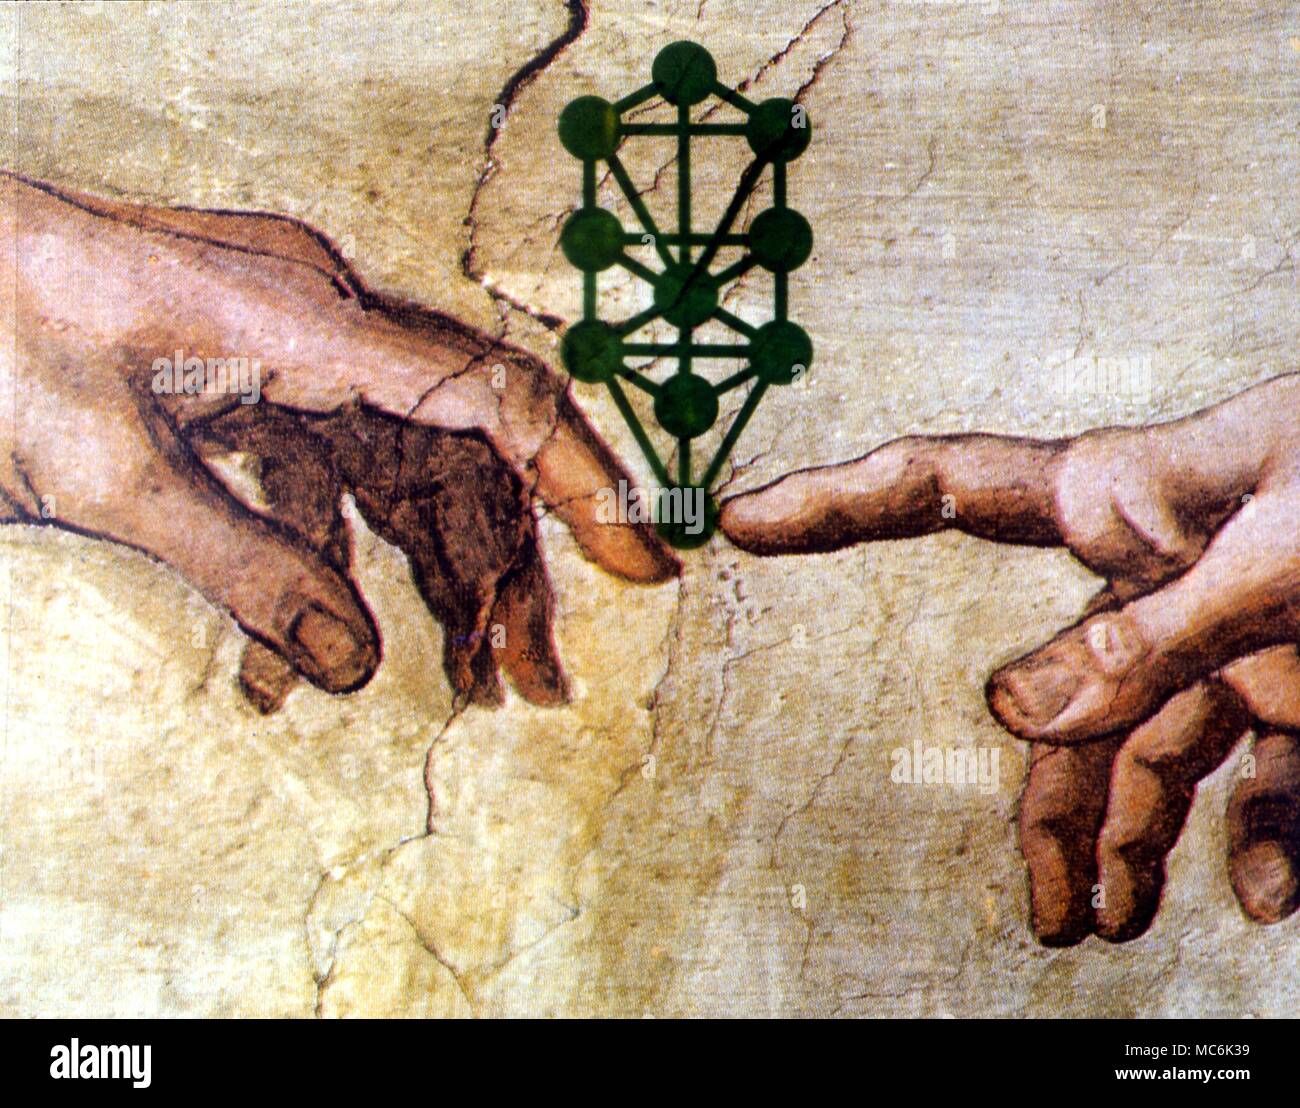 Cabbala Sephirothic Tree and Creative Hand Sephirothic Tree of the Cabbalisitc system overlaid on the famous detail of the hand of God touching that of Adam Cabbala n : sometimes called Kabbalah has two meanings; the first being a body of mystical teachings of rabbinical origin, which are based on an esoteric interpretation of the Hebrew Scriptures. The Cabbala is also known as a secret doctrine resembling these teachings. A traditionally secret esoteric or occult matter The Sephirothic Tree consists of ten globes of luminous splendor arranged in three vertical columns and conne Stock Photo